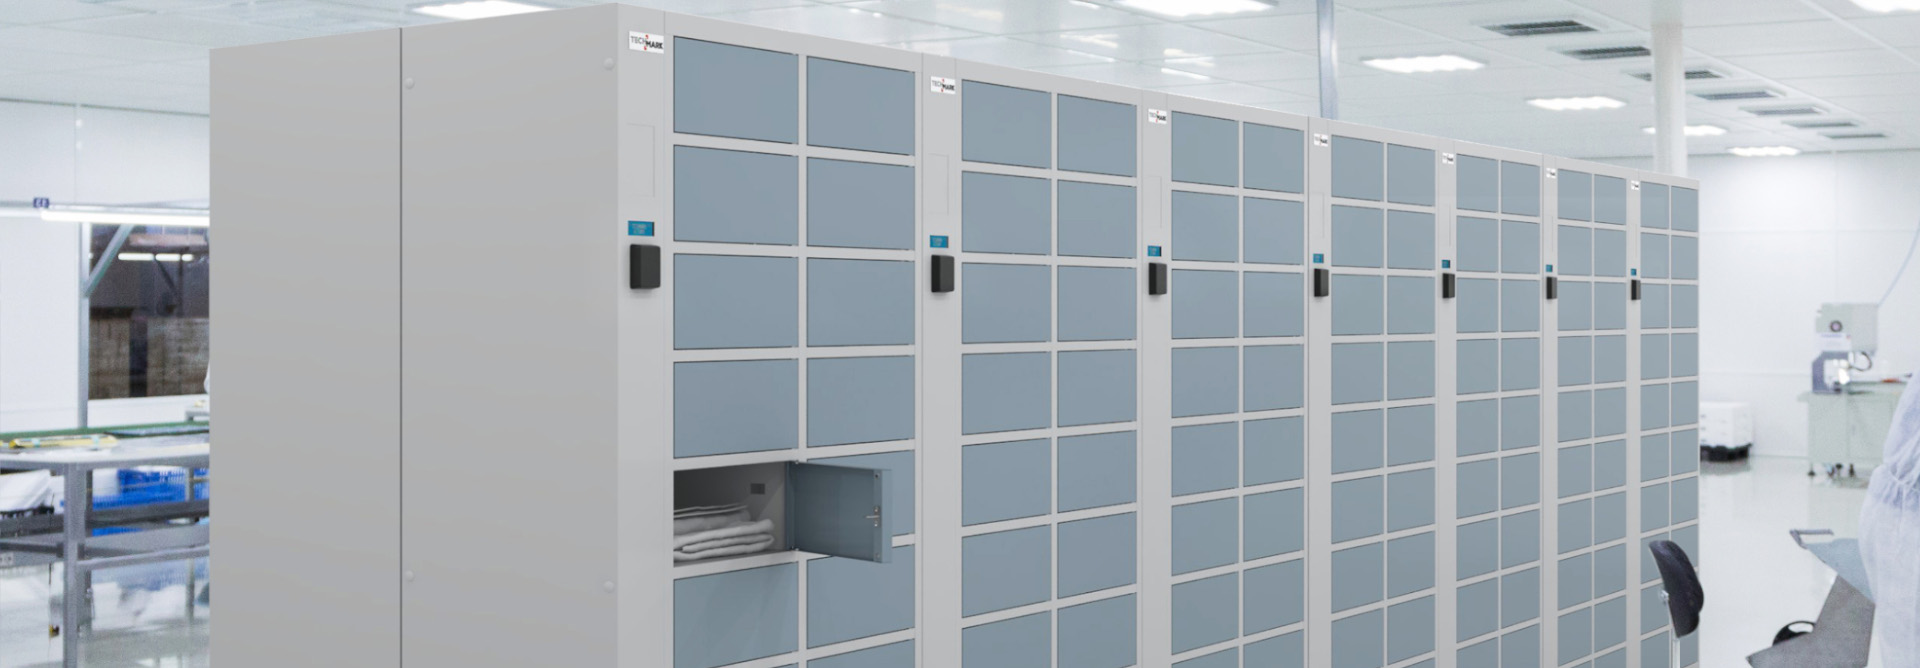 The S.1 system's multi-compartment cabinets are the simplest solution for secure storage.